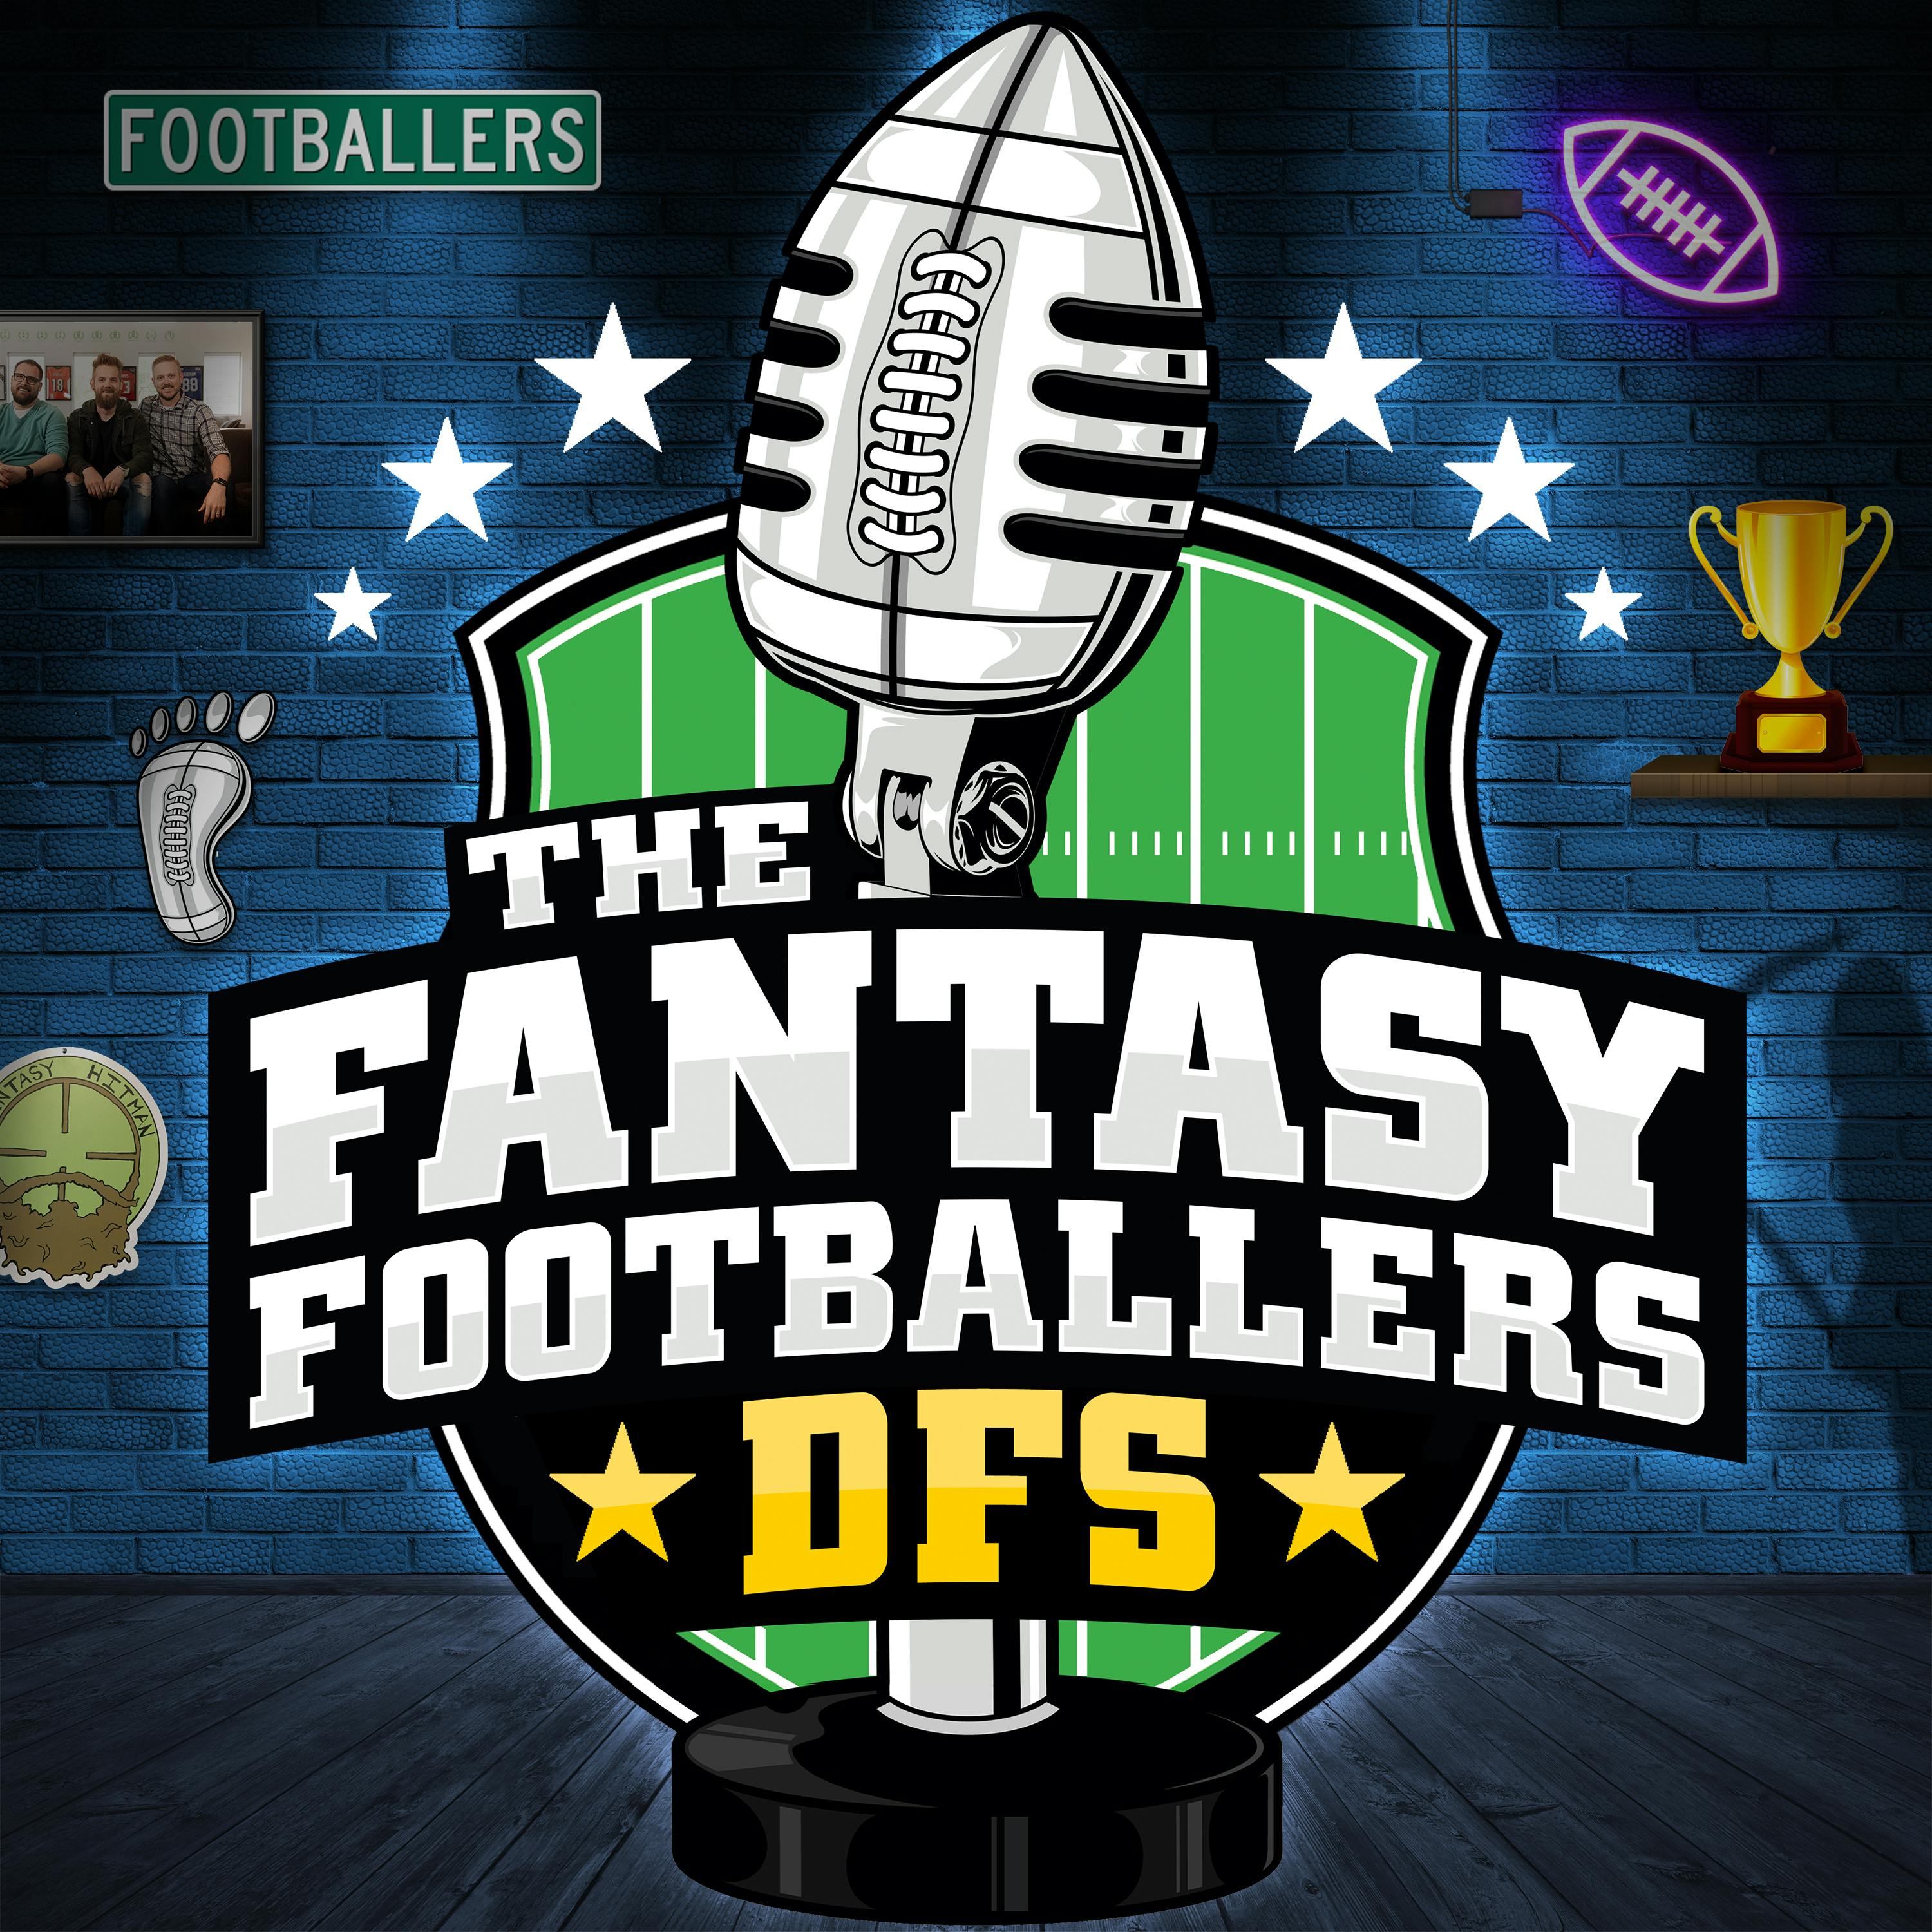 Conference Championship DFS Podcast - Fantasy Football DFS